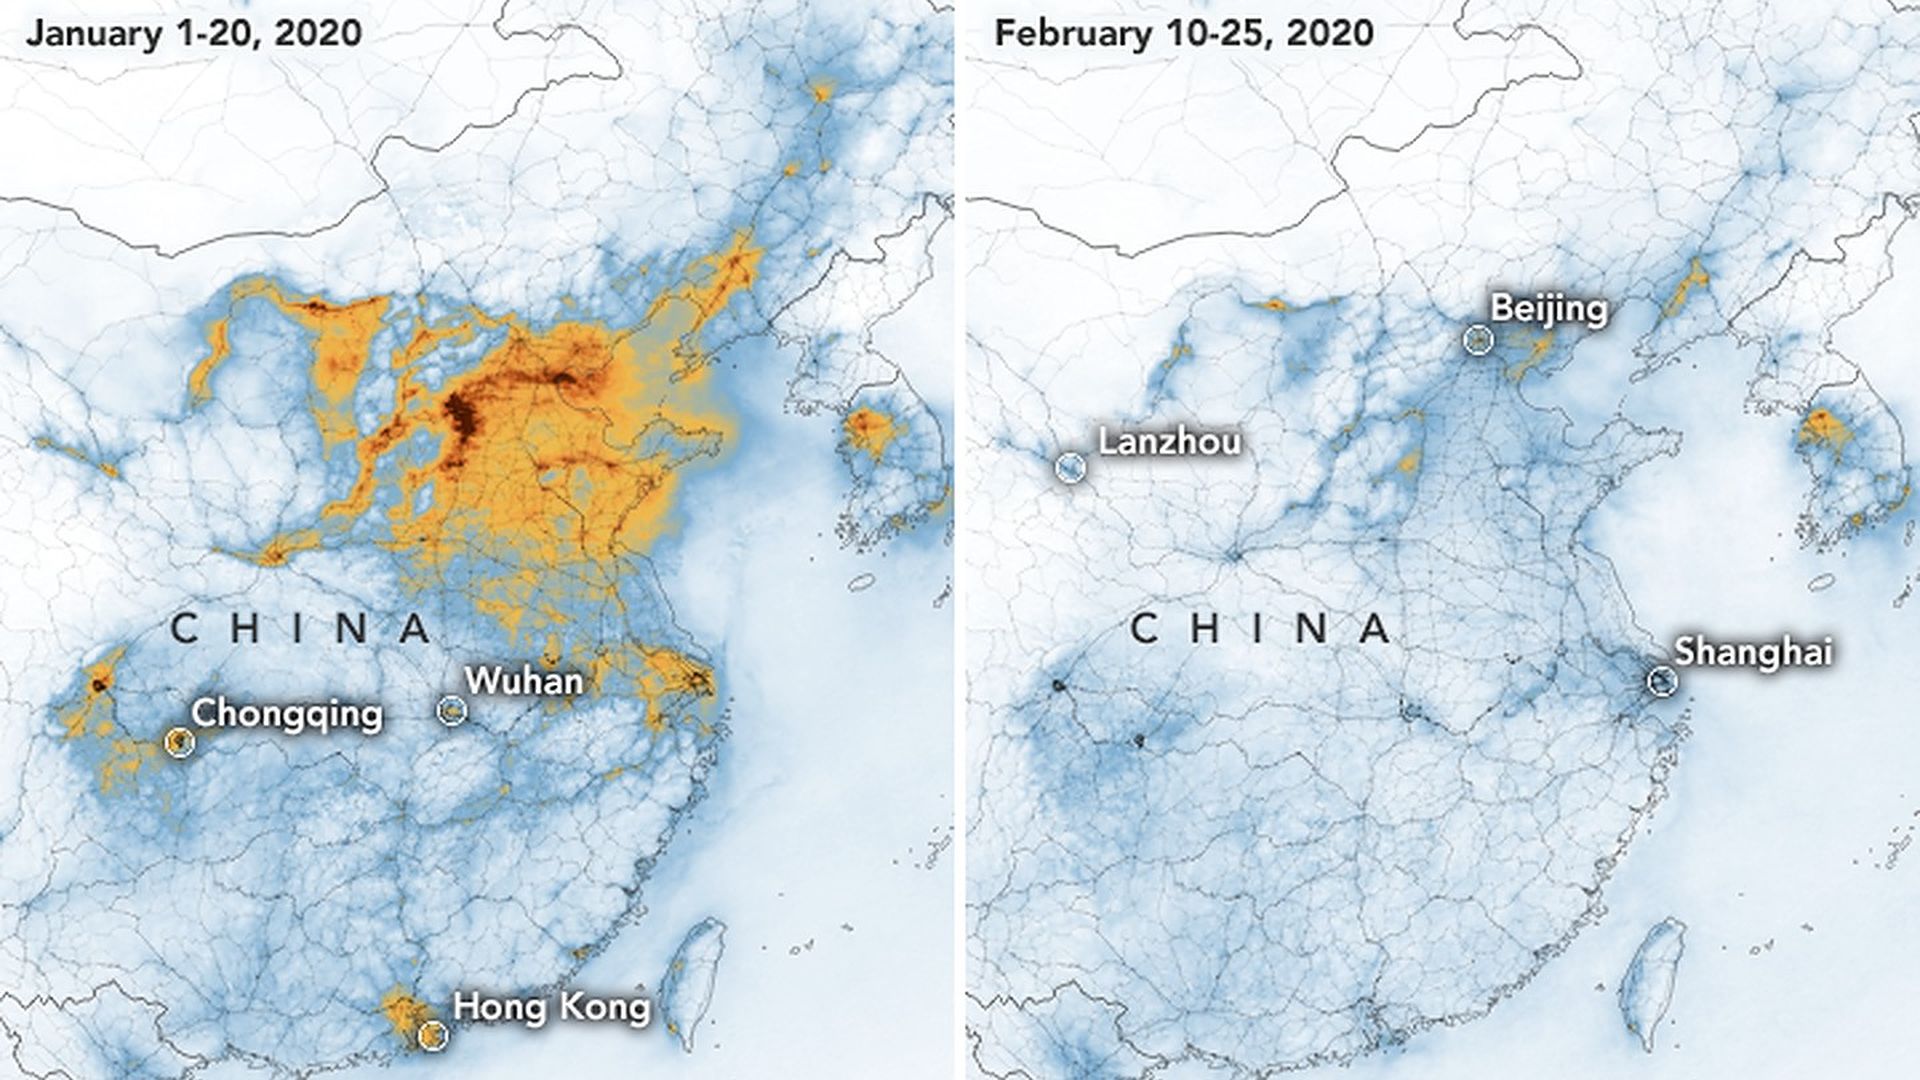 Satellite images showing a dramatic decline in pollution levels over China